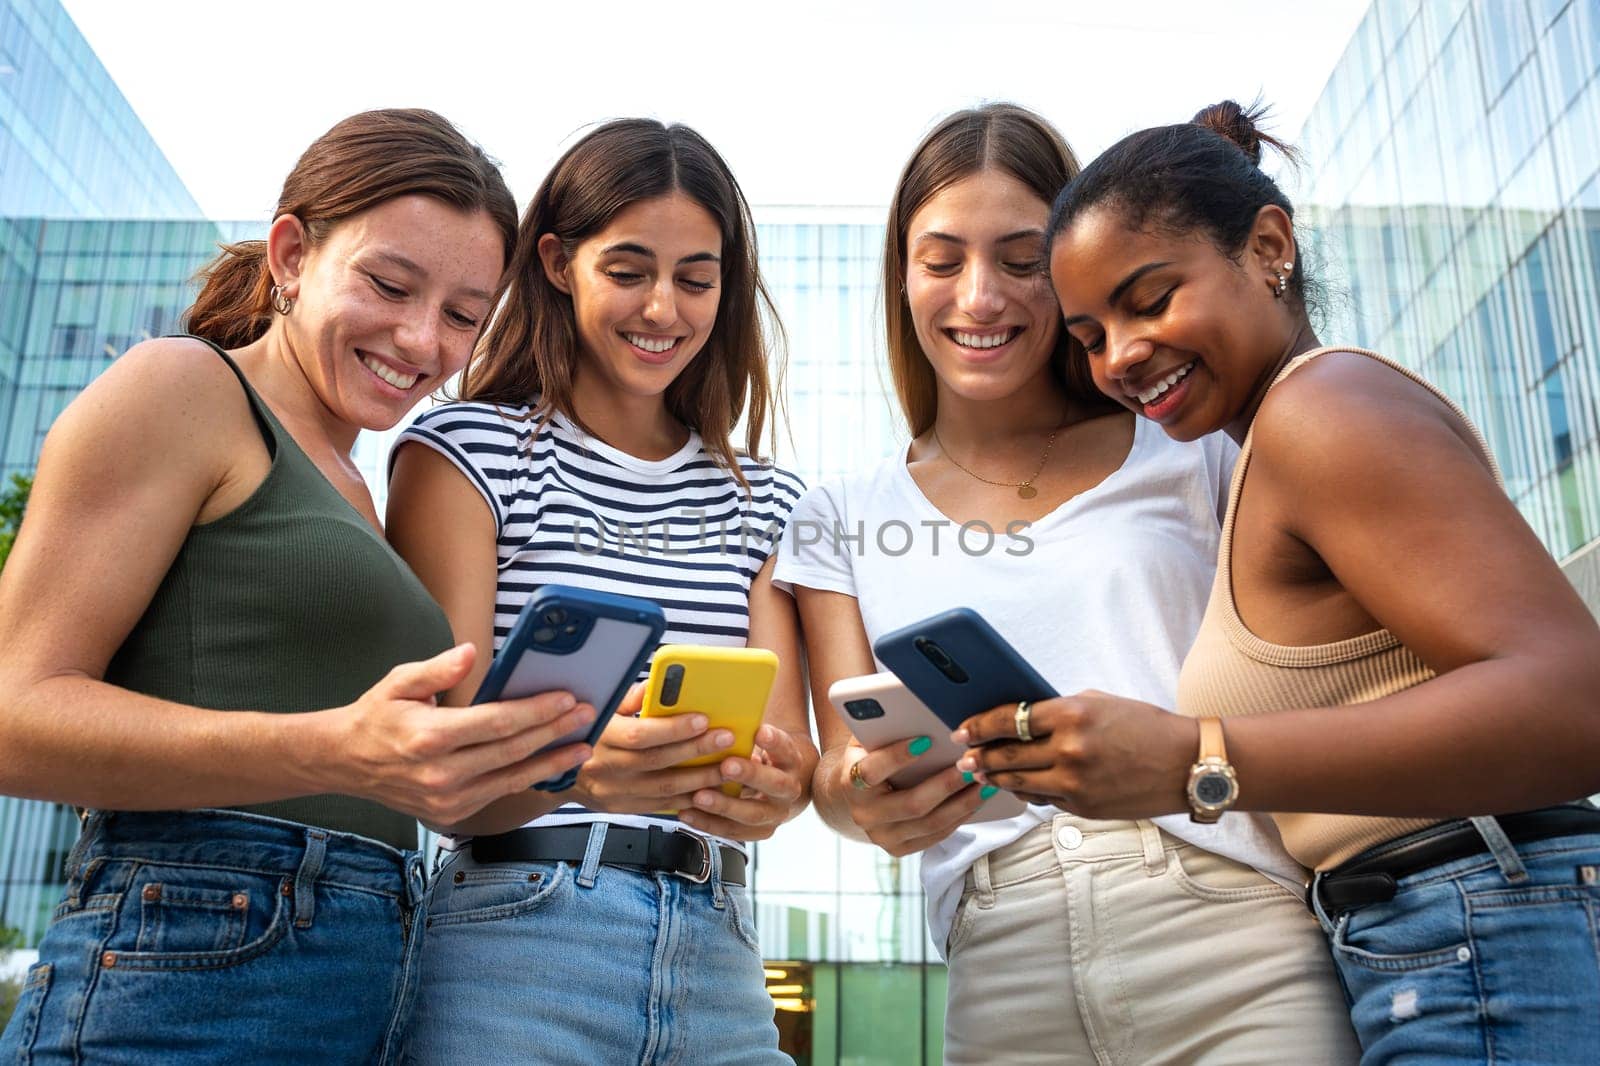 Group of happy multiracial college girl friend students looking at mobile phone ignoring each other. Smartphone and tech addiction. Youth lifestyle and social media concept.